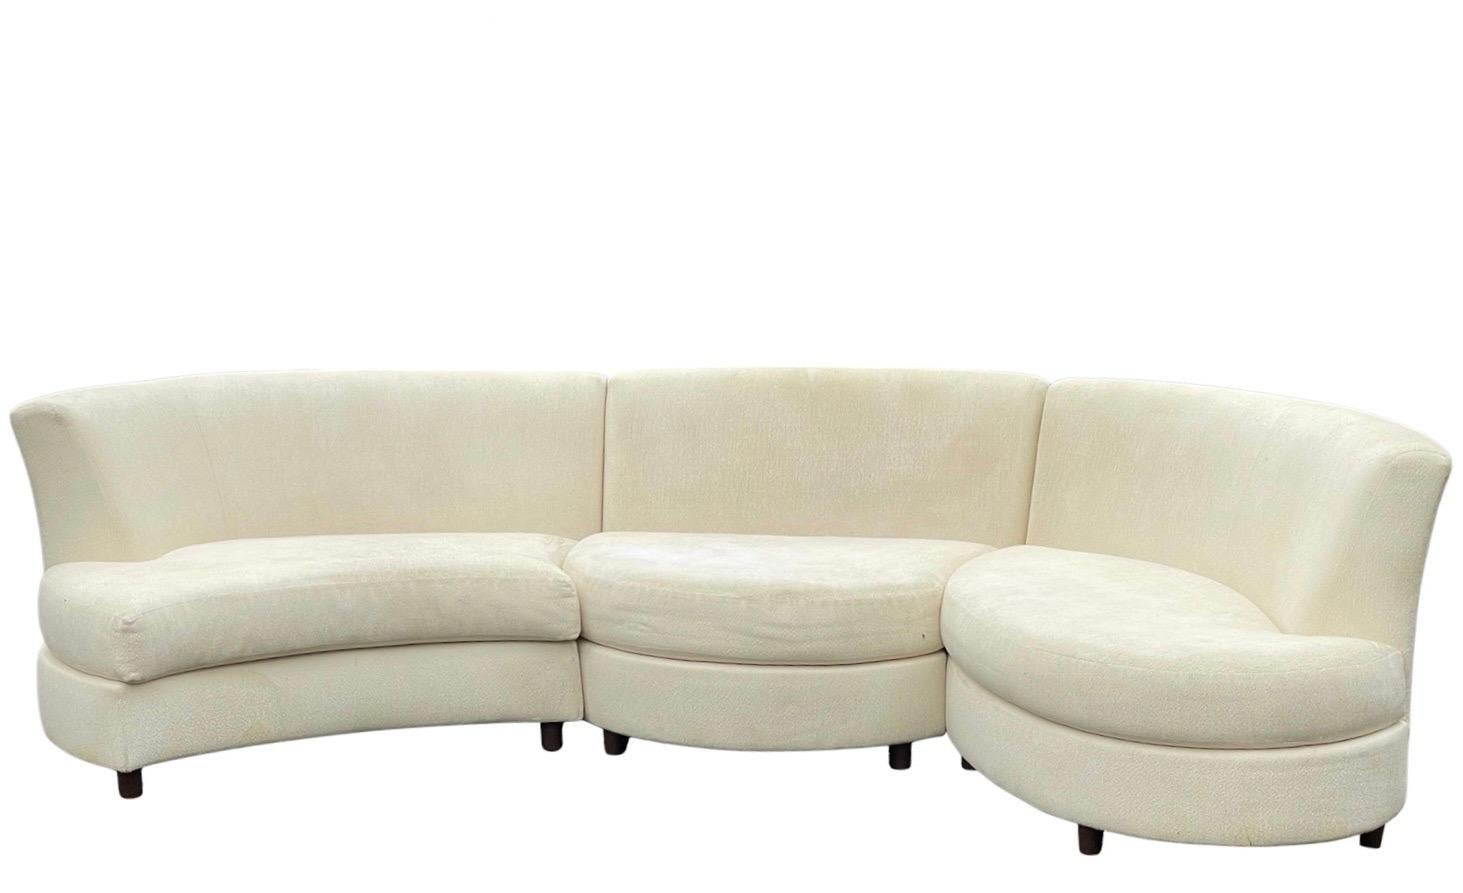 Upholstery 1980s Postmodern Weiman Sculptural Sectional Sofa For Sale